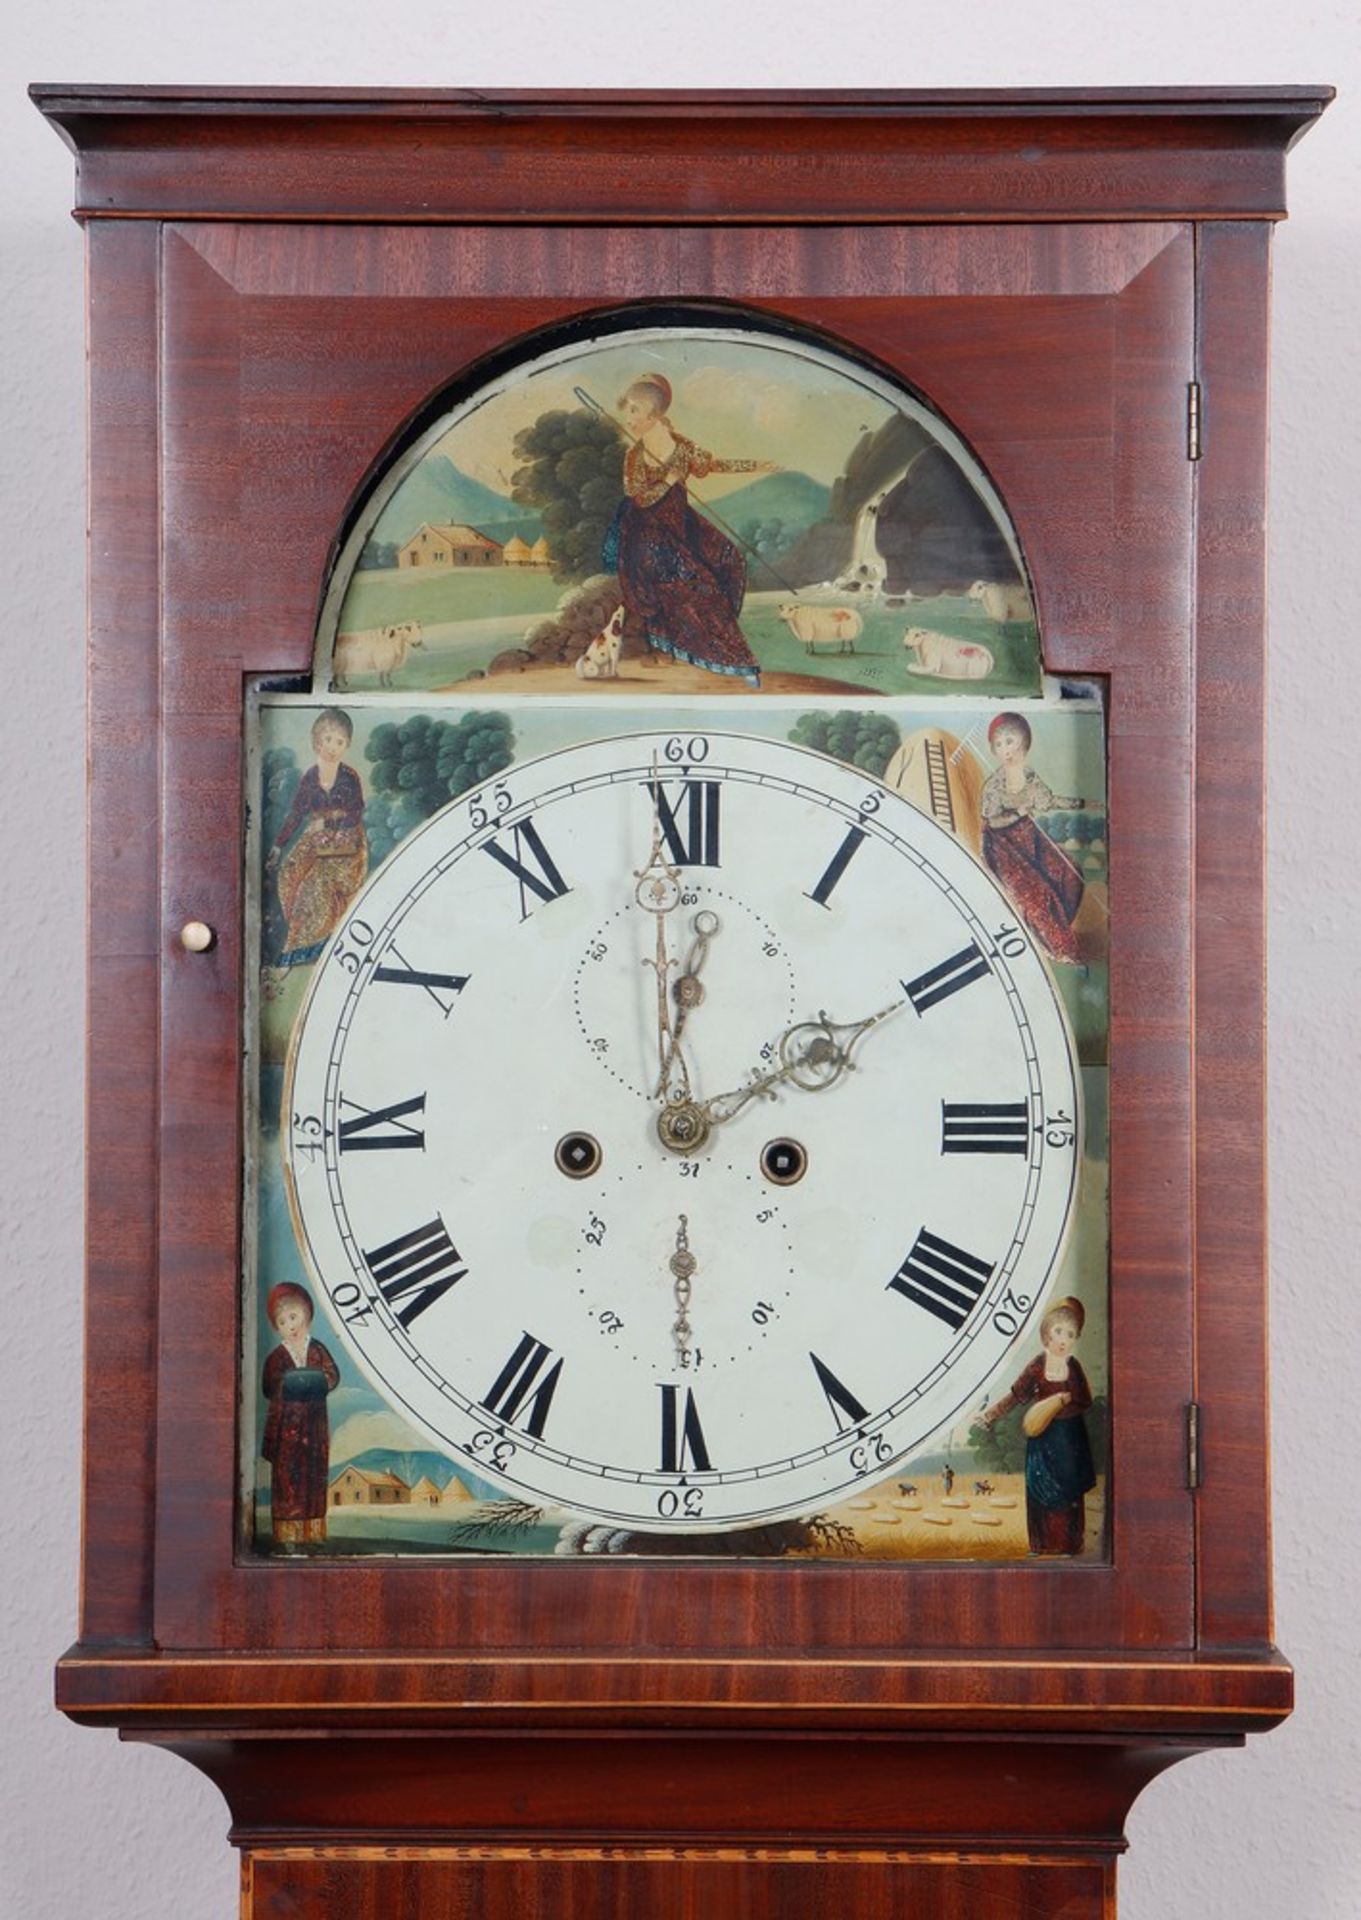 Grandfather clock, probably England, 2nd half 18th C. - Image 2 of 4